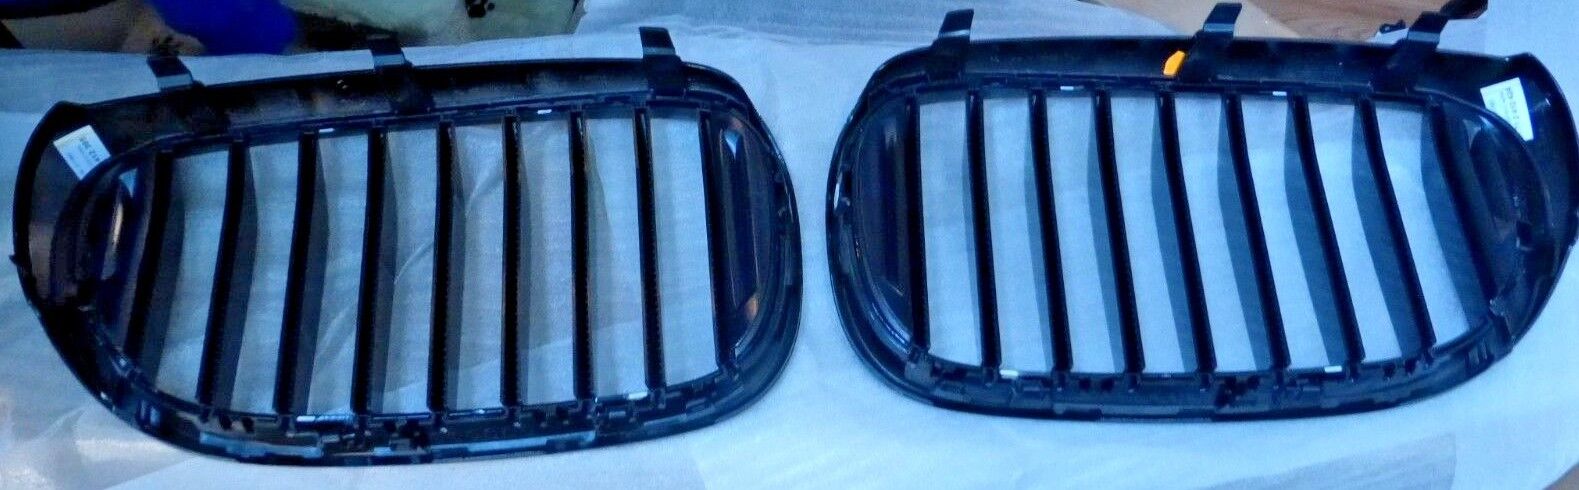 BMW OEM G11 G12 7 Series 2016-19 M Performance Gloss Black Front Grille Pair NEW